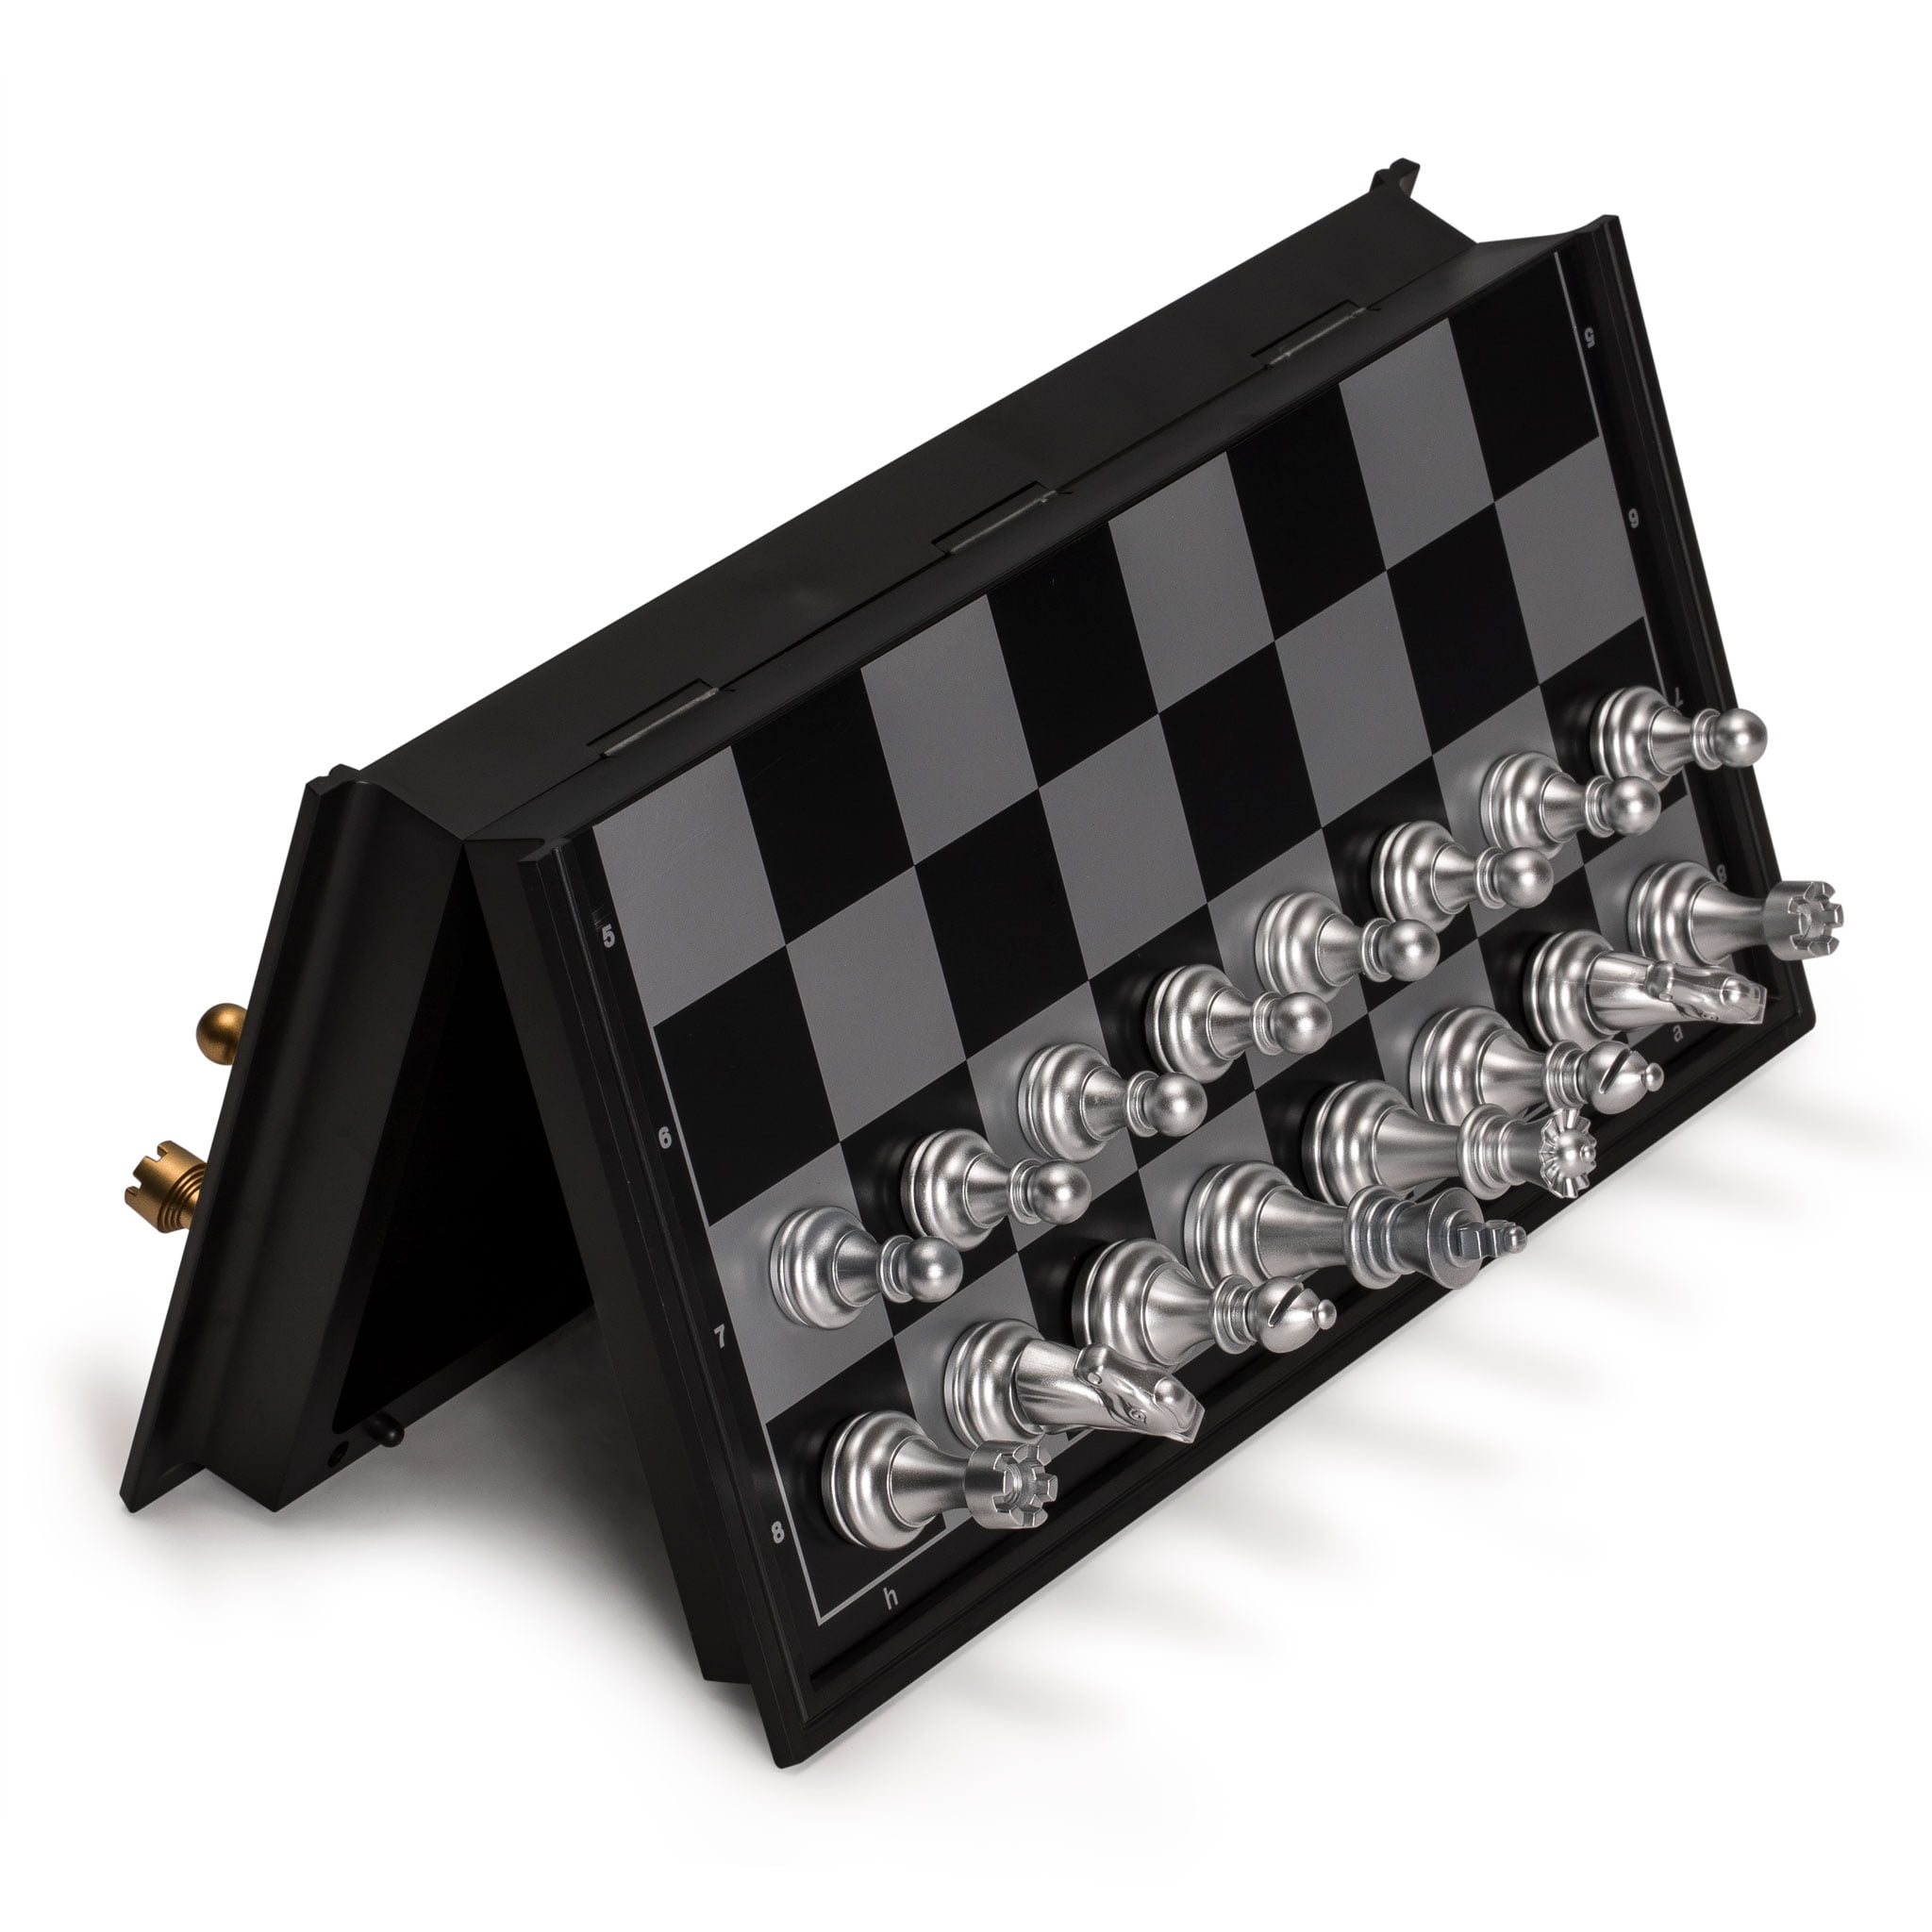 Luoyer 9.8 Inch Portable Travel Chess Set Magnetic Folding Chessboard Small  Chess Board Game Sets Strategic for Teens Adults Beginners